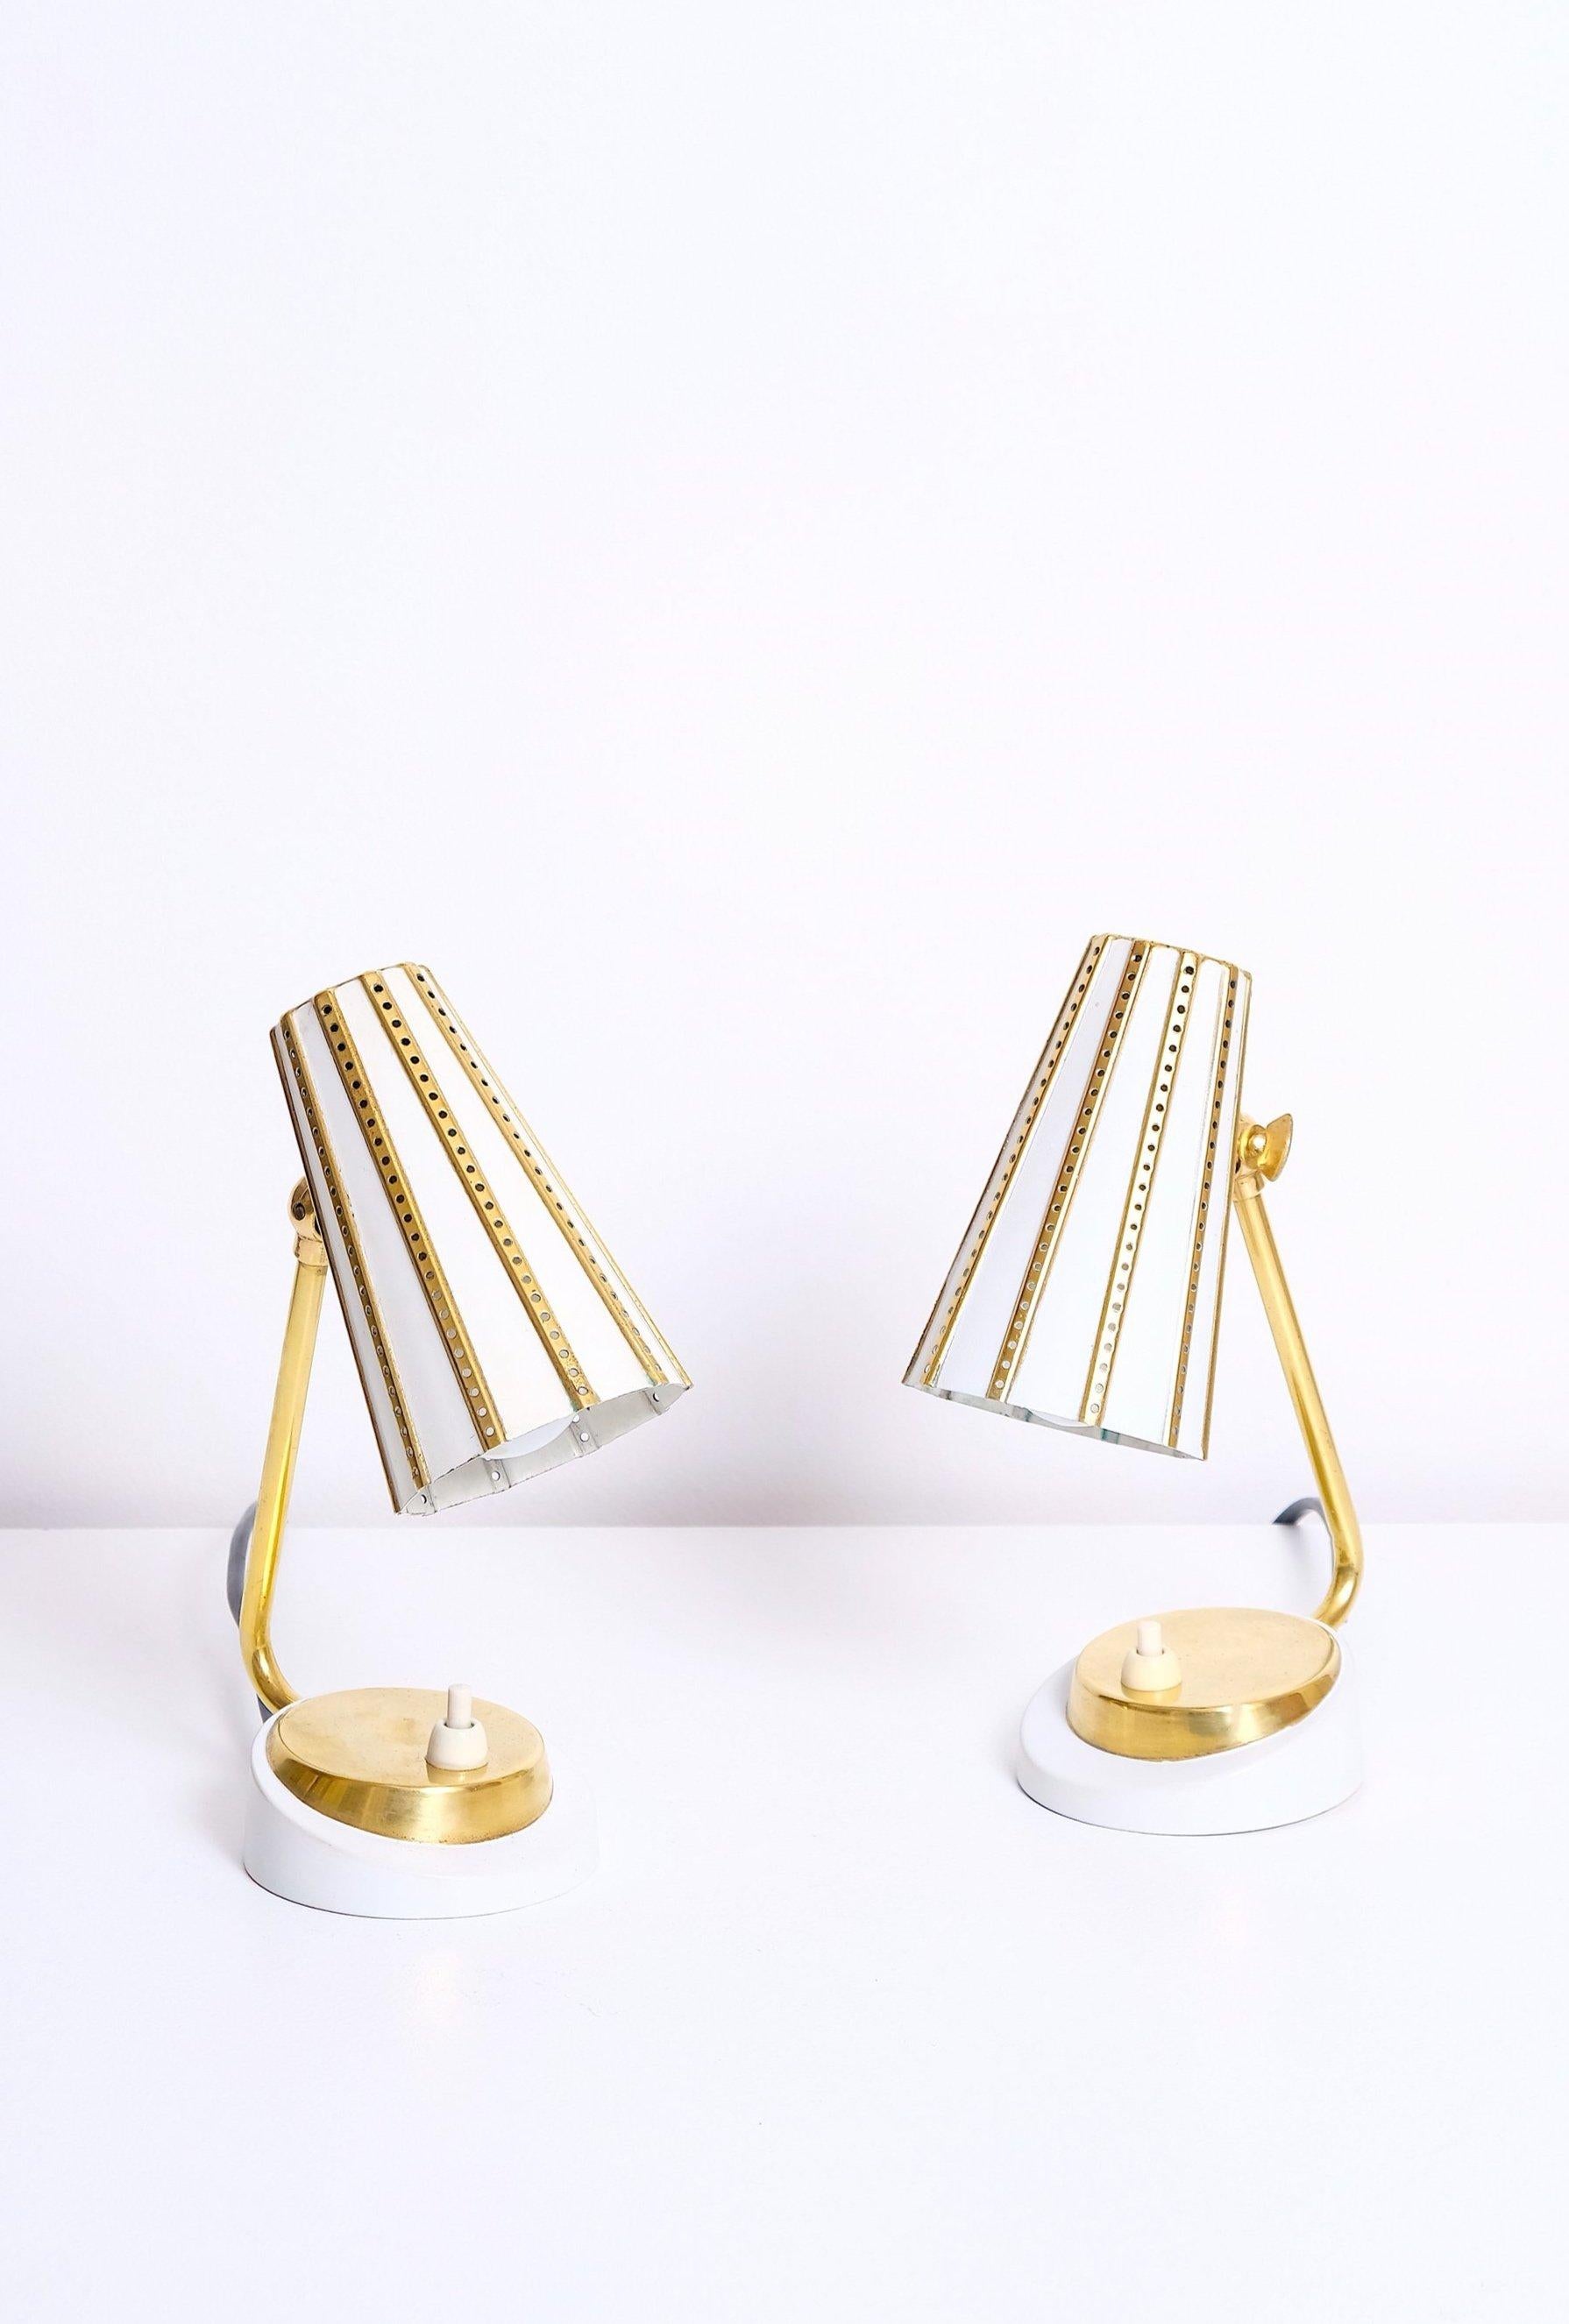 Pair of brass nightstand lamps manufactured in Germany in the 1950’s. Lacquered brass body, perforated lacquered brass shades. 40-60 watt E-14 (European bulb) or higher if LED/CFL.
Verified original E-14 sockets, 20/2 plastic cord, push button